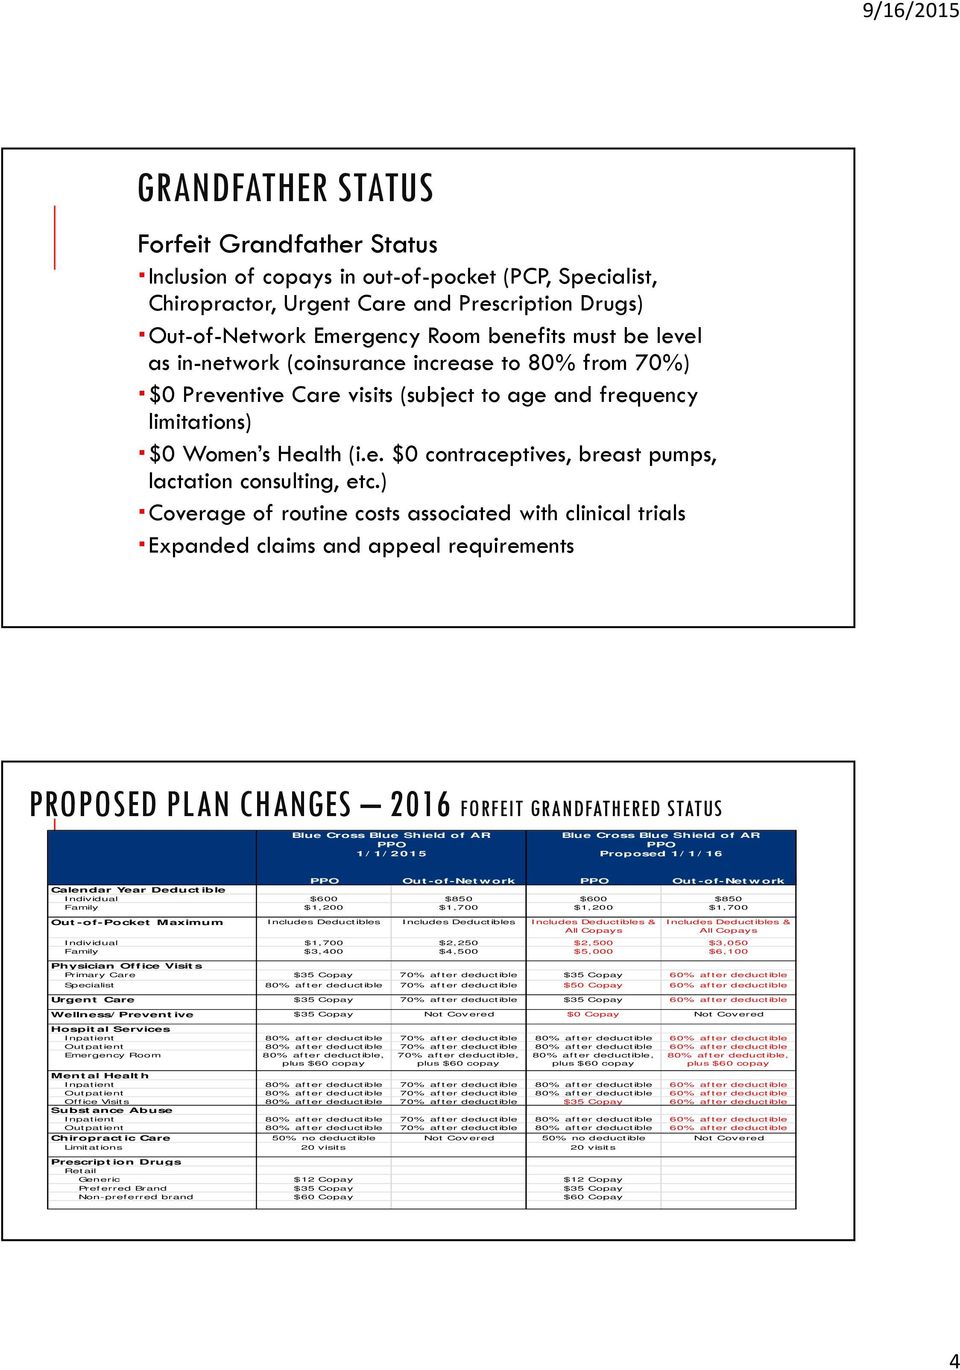 ) Coverage of routine costs associated with clinical trials Expanded claims and appeal requirements ARKANSAS STATE UNIVERSITY SYSTEM PROPOSED PLAN CHANGES 2016 FORFEIT GRANDFATHERED STATUS Blue Cross